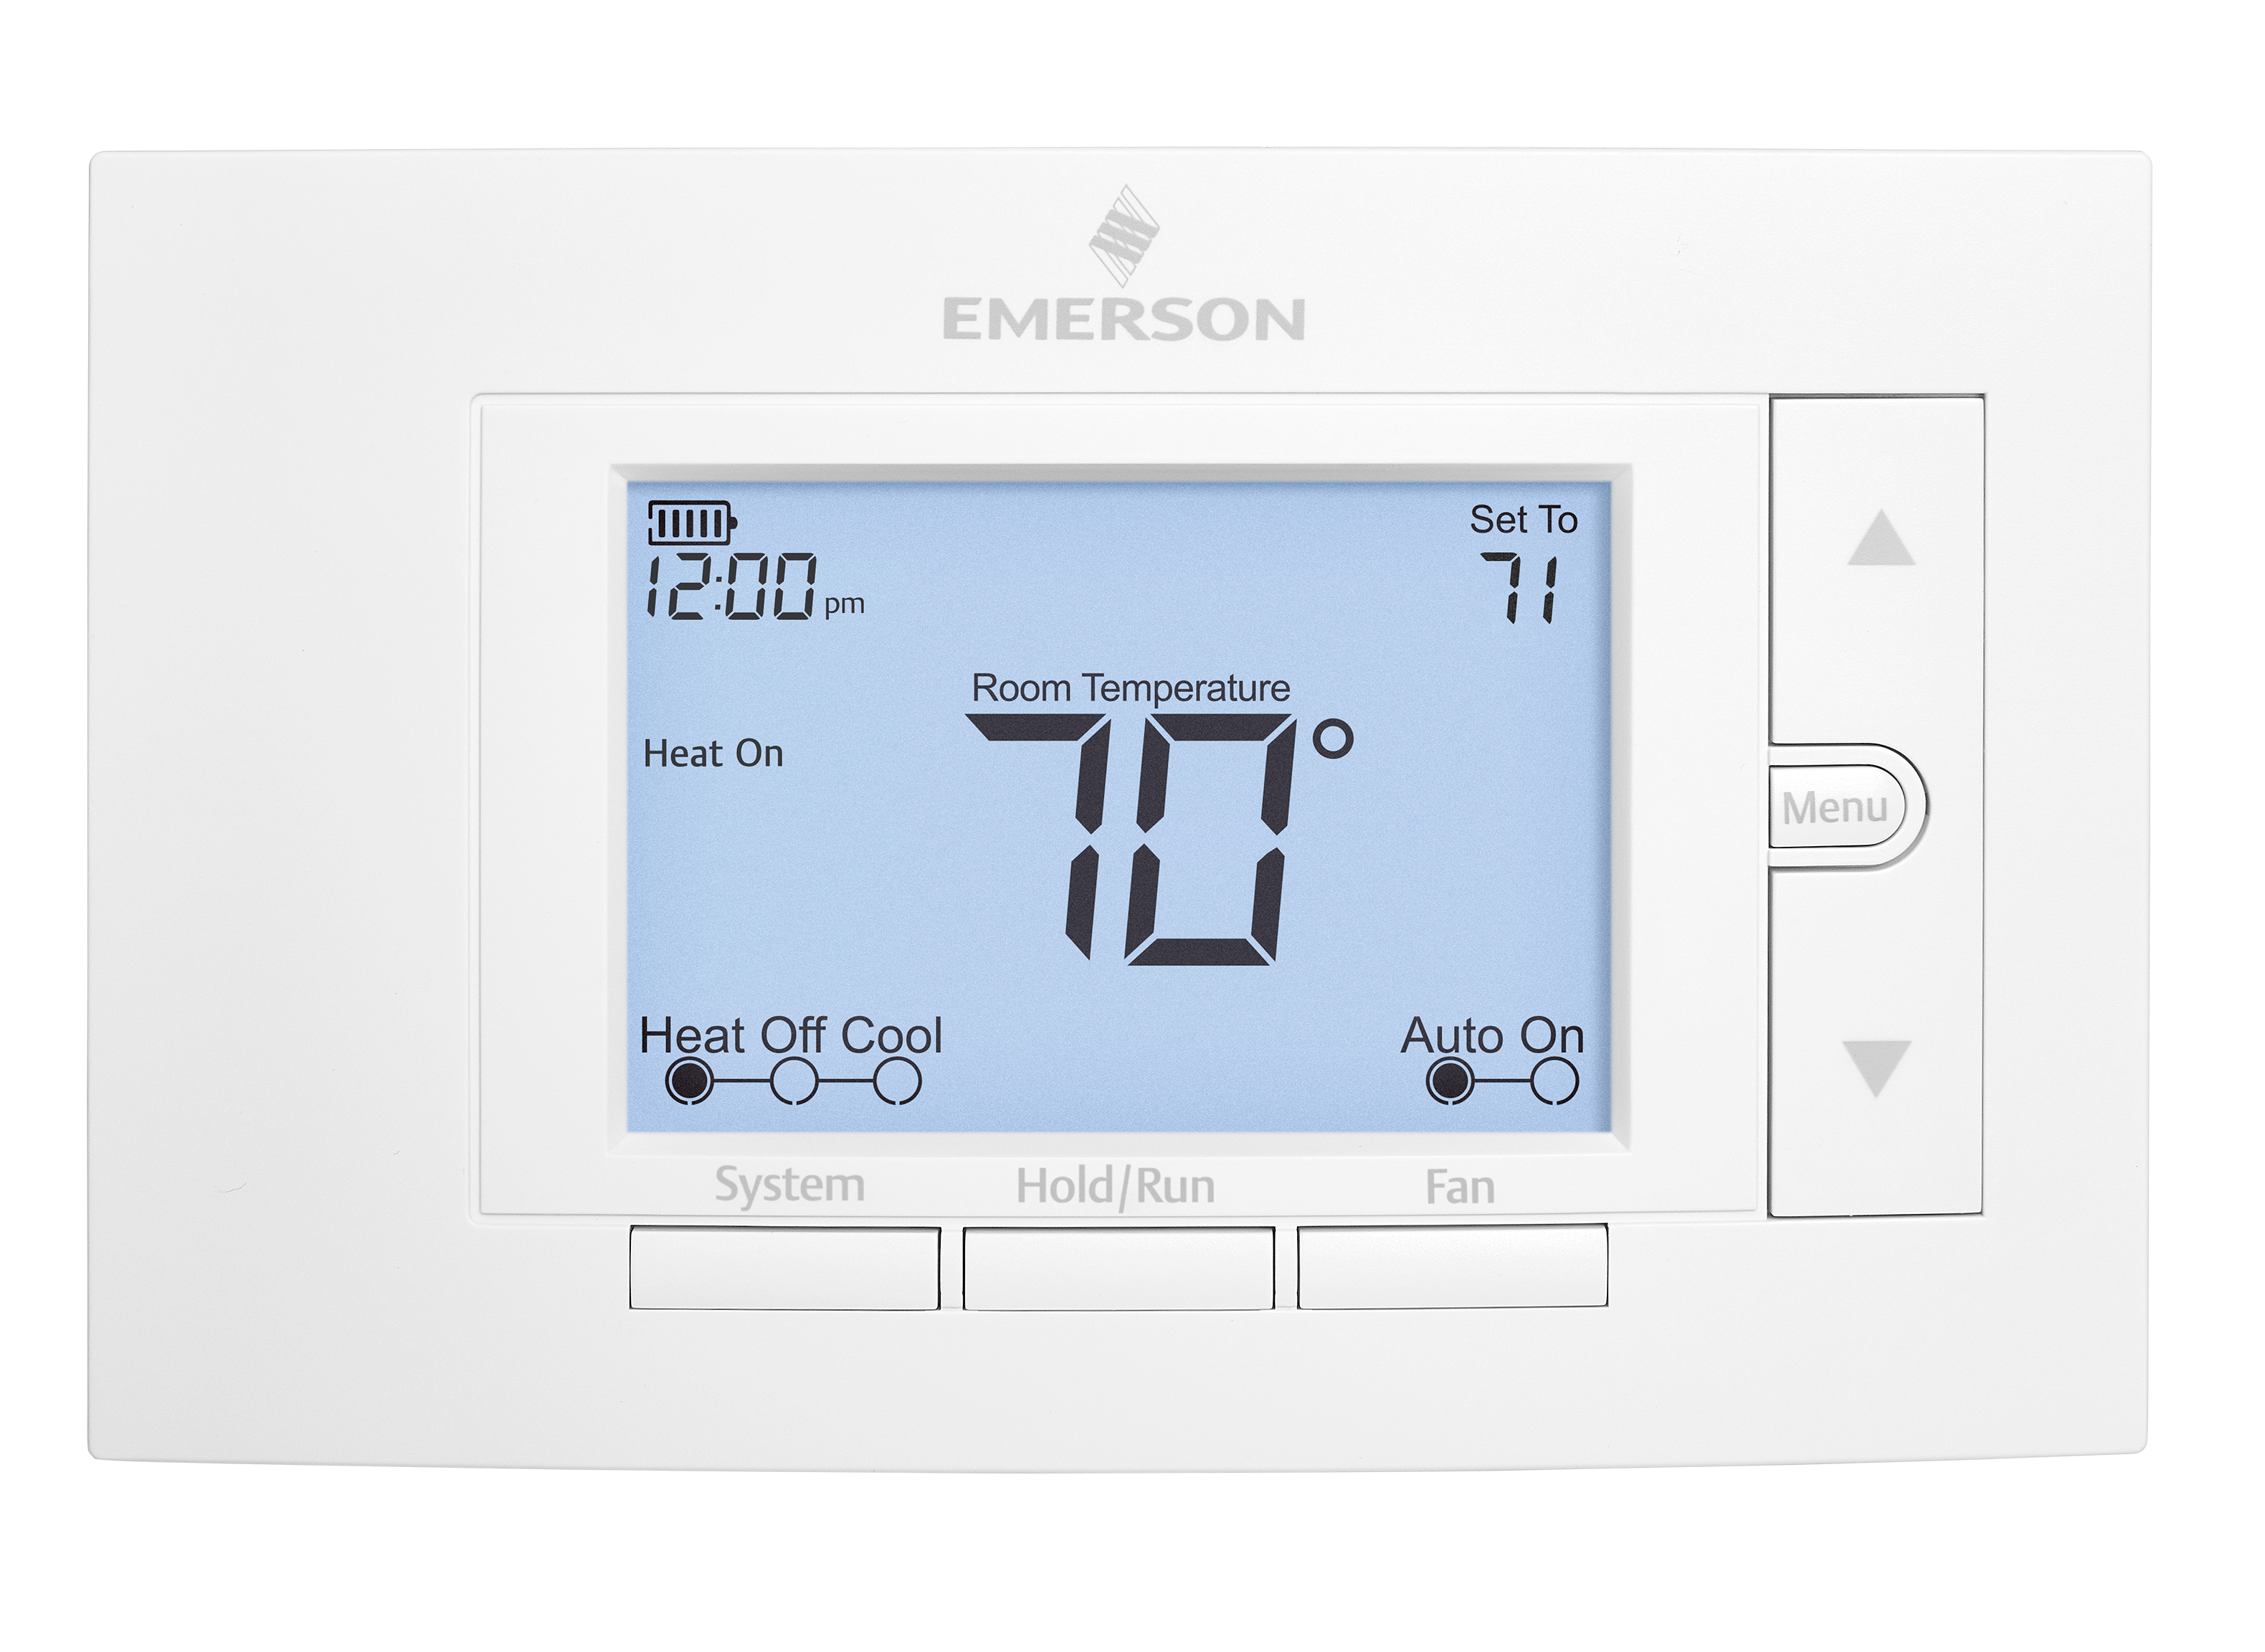 Emerson UP310 Premium 7 Day Programmable Thermostat 1 